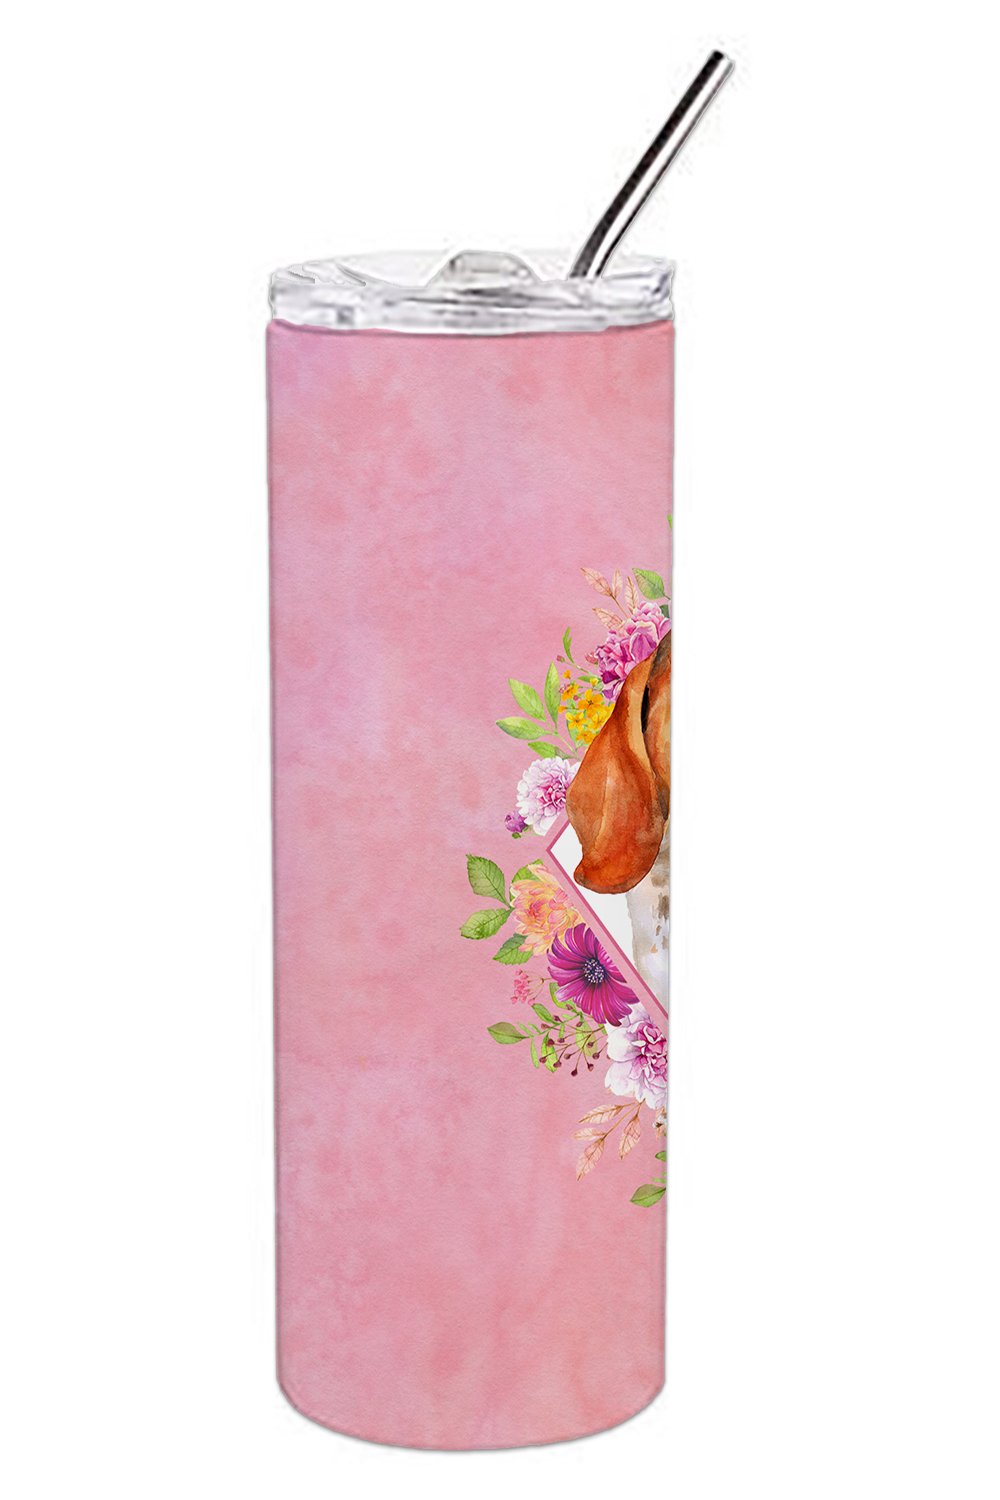 Basset Hound Pink Flowers Double Walled Stainless Steel 20 oz Skinny Tumbler CK4116TBL20 by Caroline's Treasures